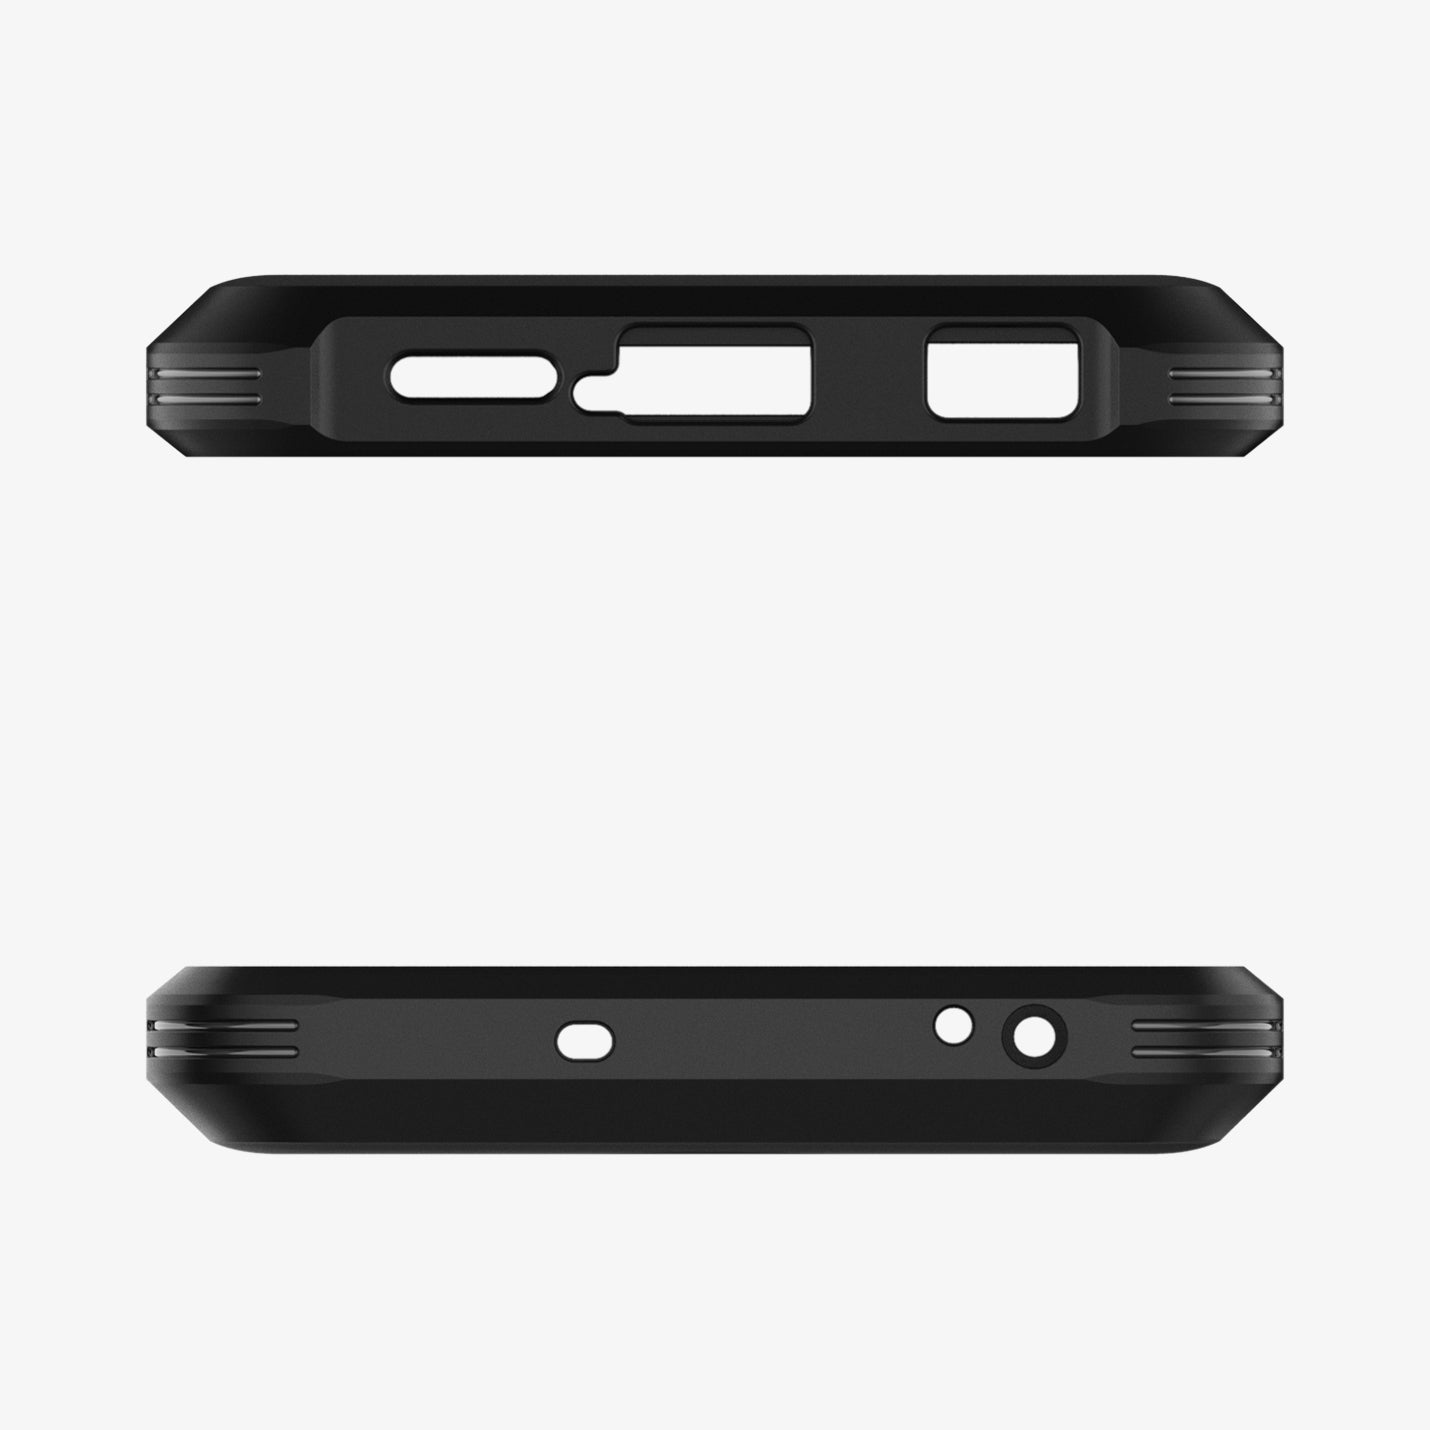 ACS03035 - Xiaomi POCO X3 Pro Tough Armor Case in Metal Slate showing the top and bottom